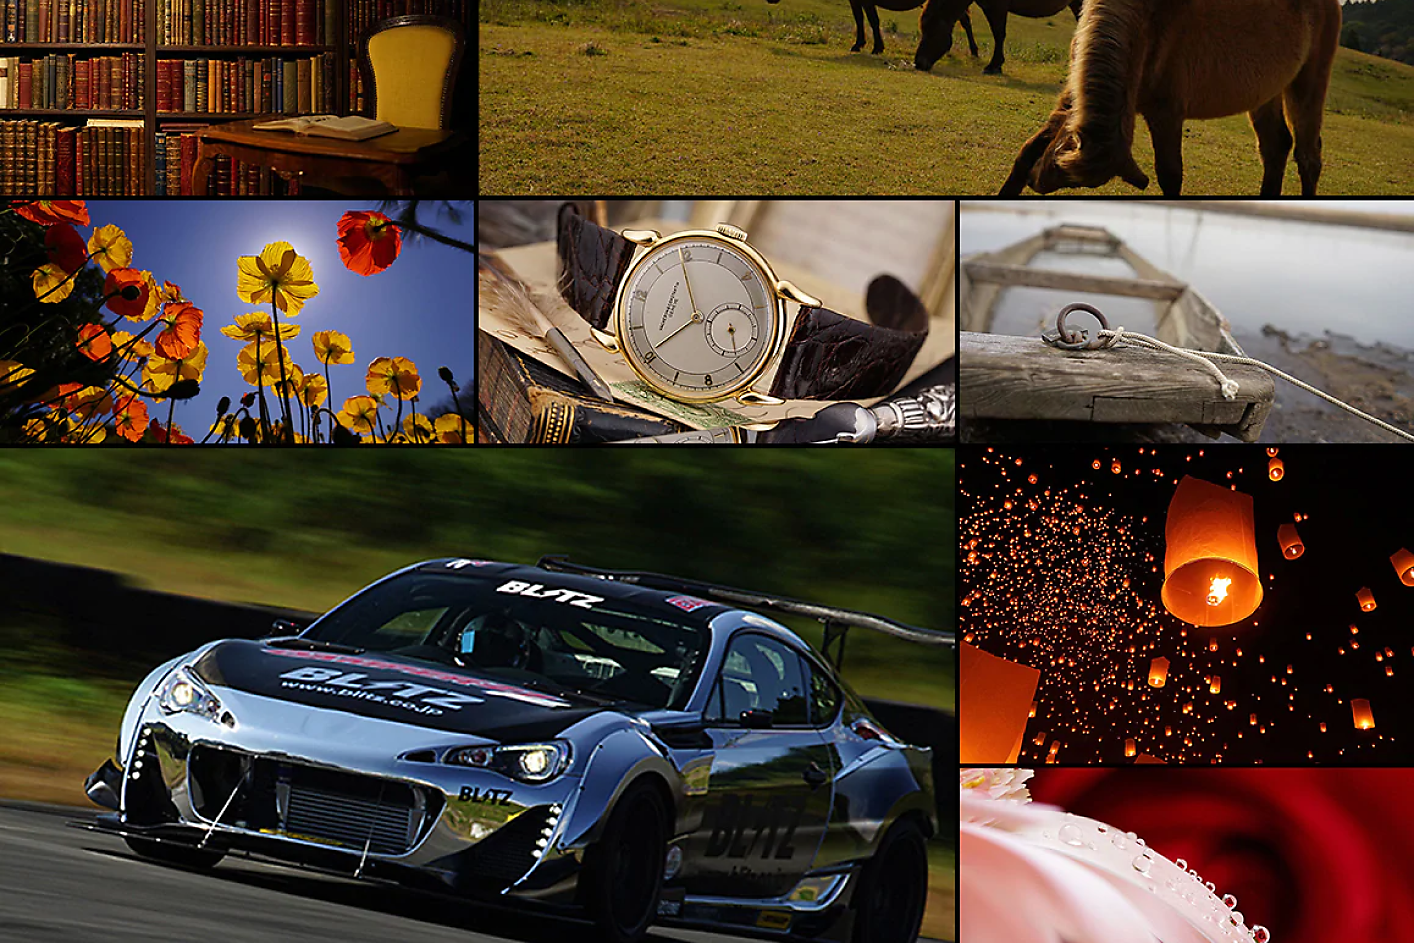 Colorful collage of eight images, including a racecar, horse, watch, and flowers